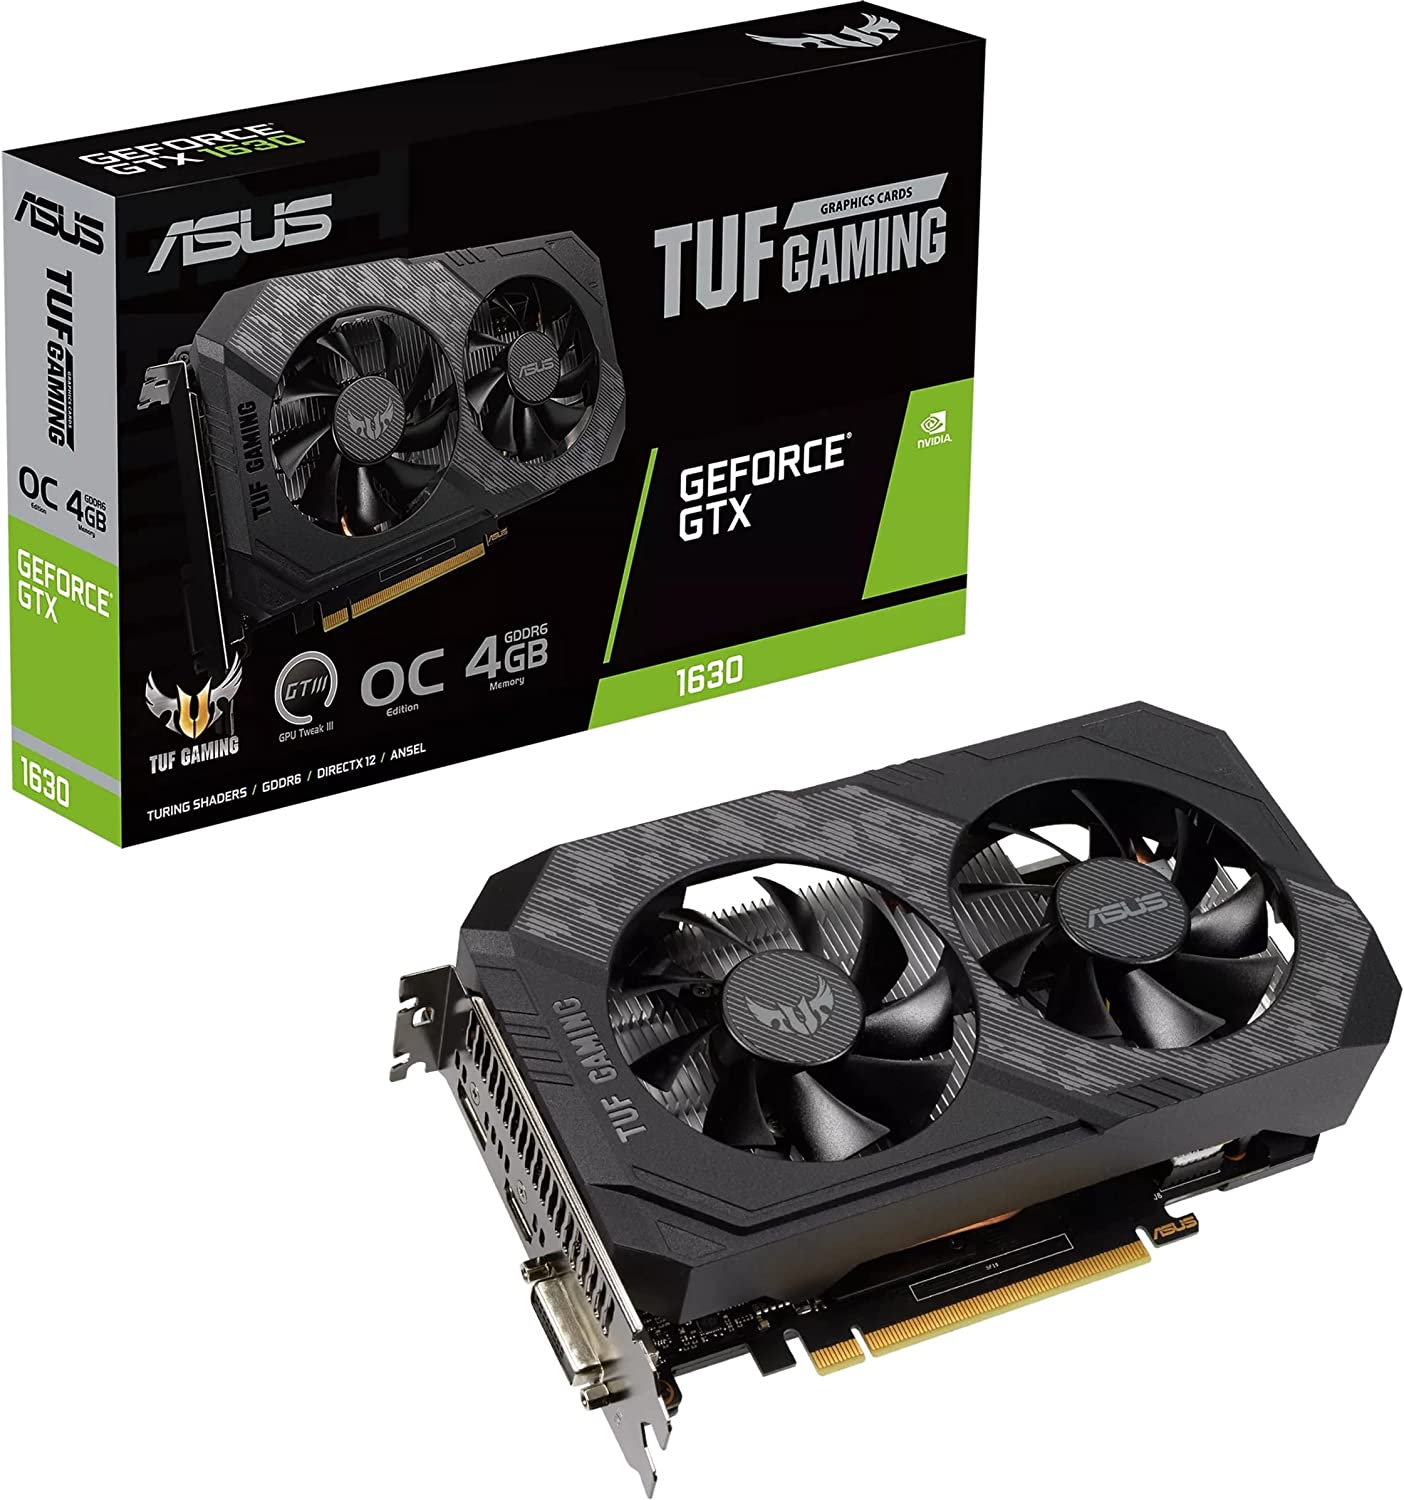 Buy Gaming Graphics Cards For PC